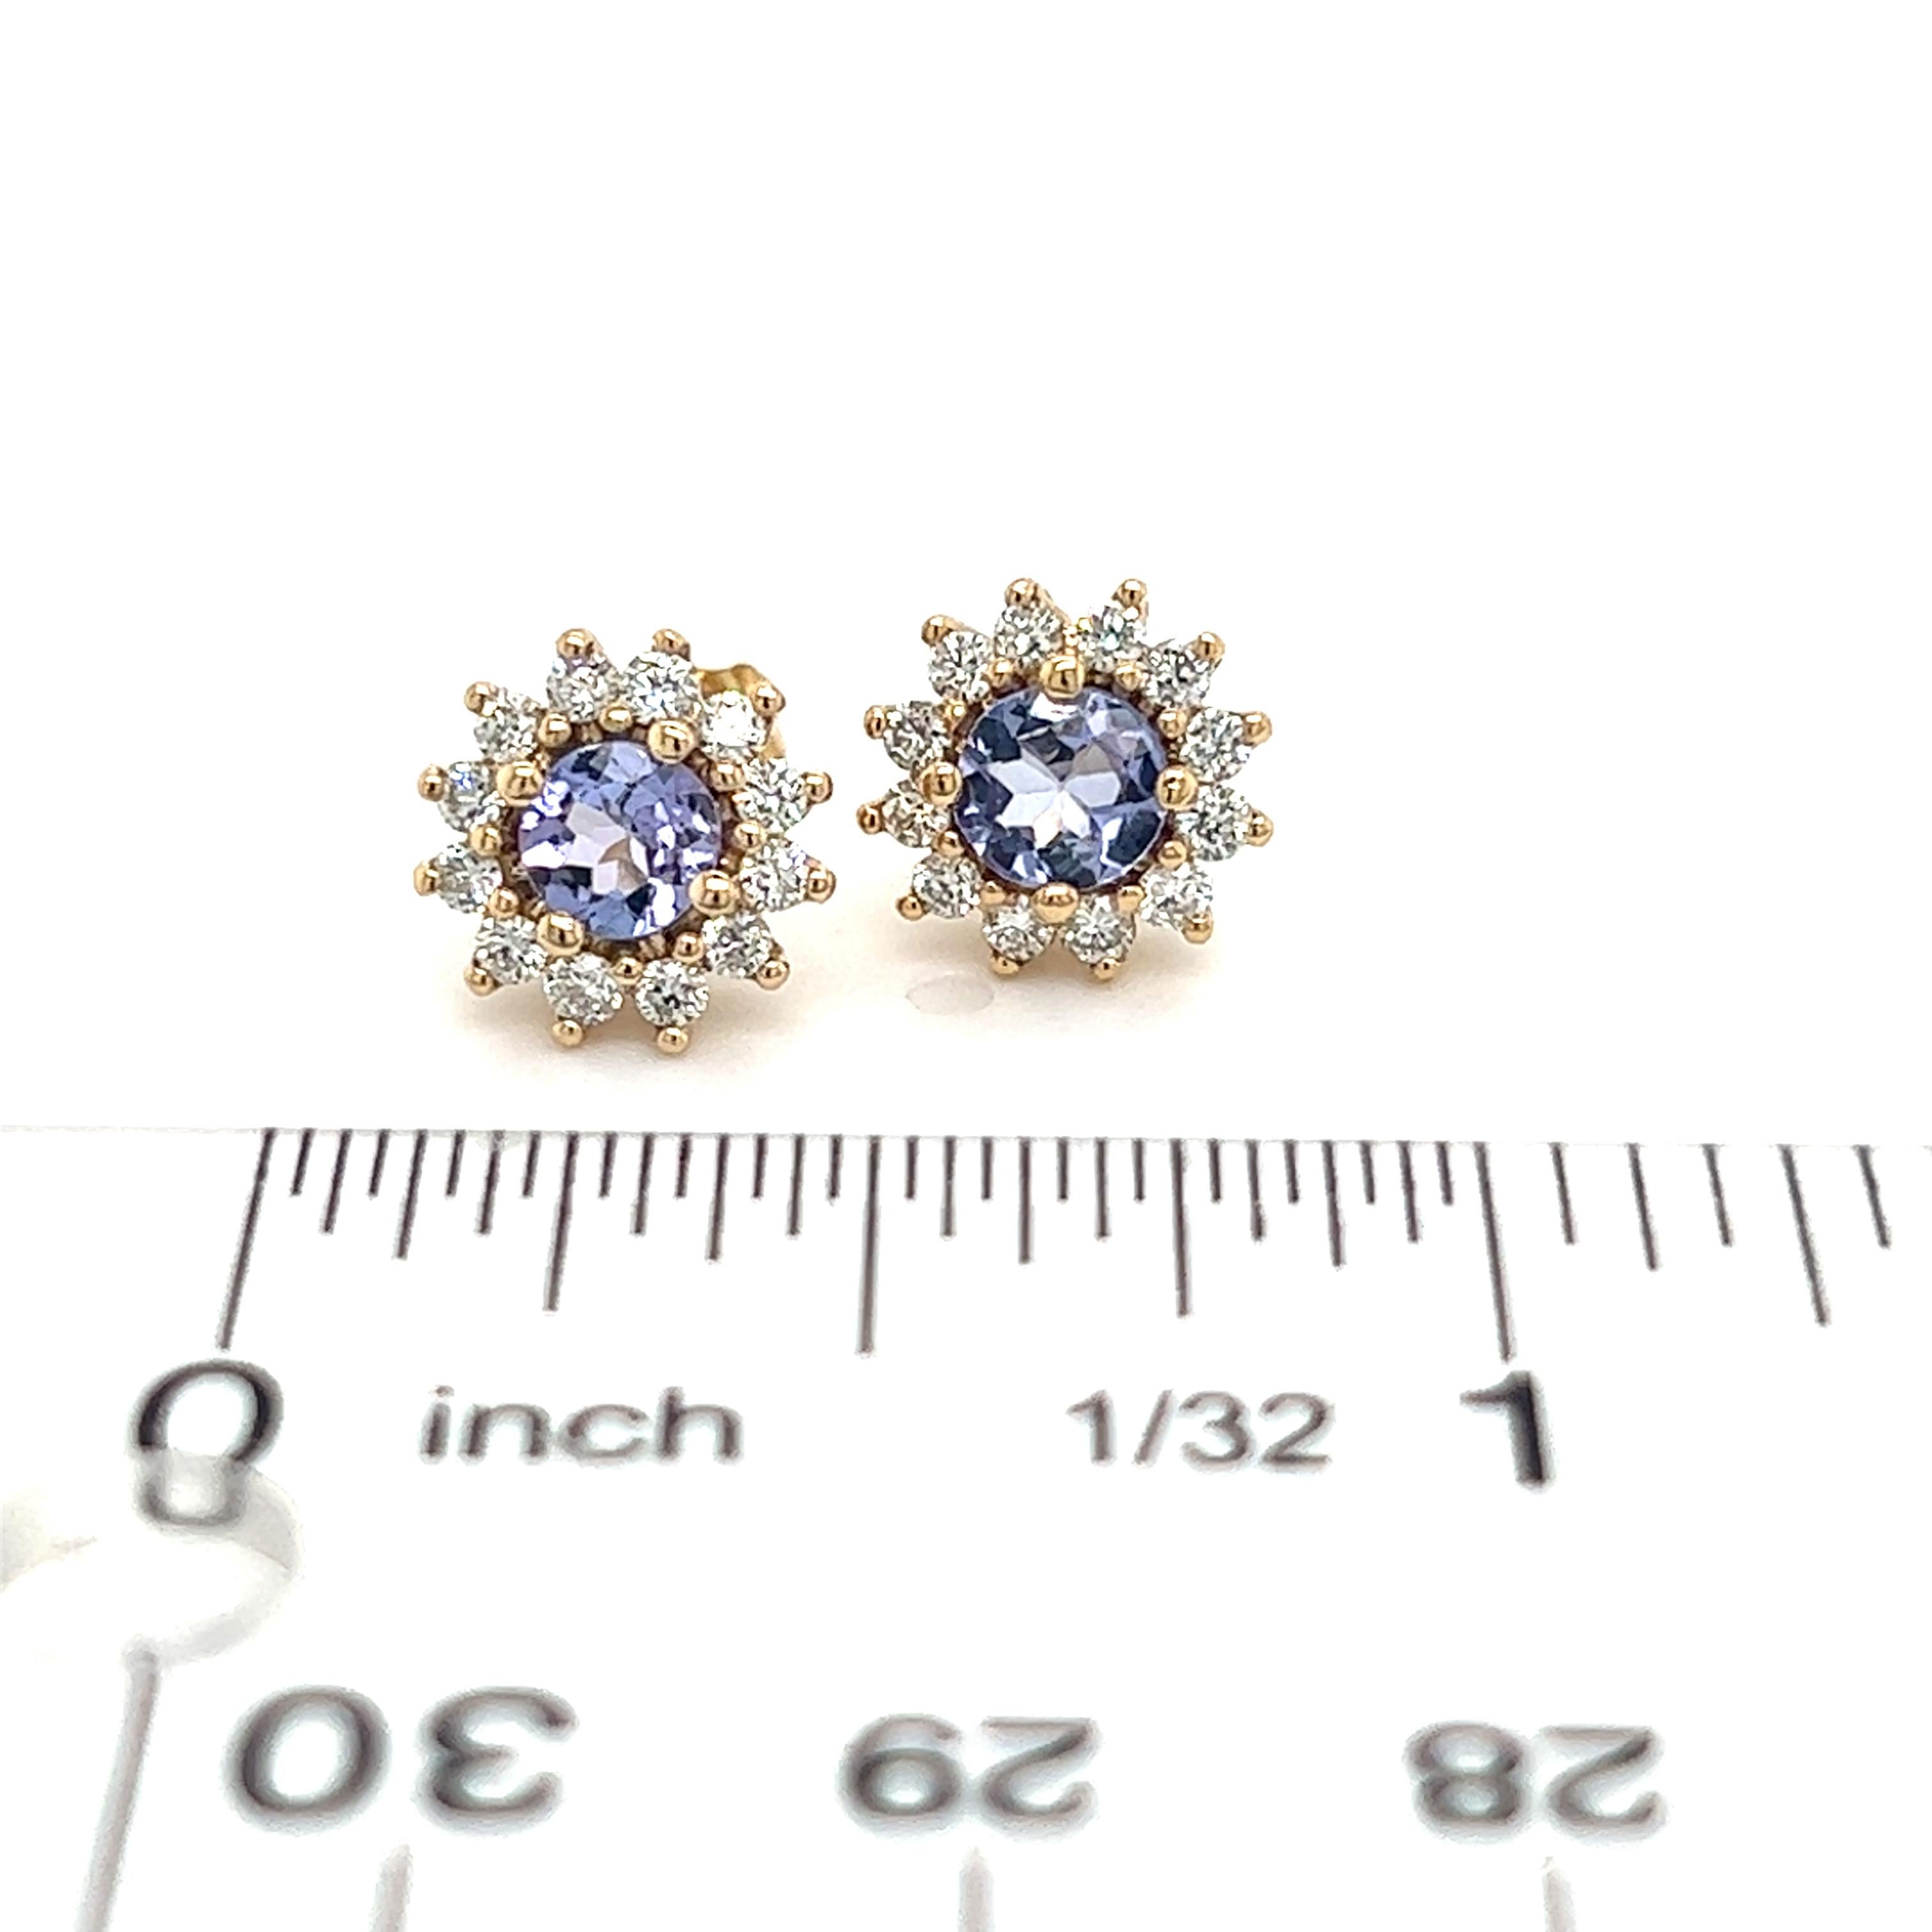 Natural Tanzanite Diamond Stud Earrings 14k Y Gold 1.18 TCW Certified In New Condition For Sale In Brooklyn, NY